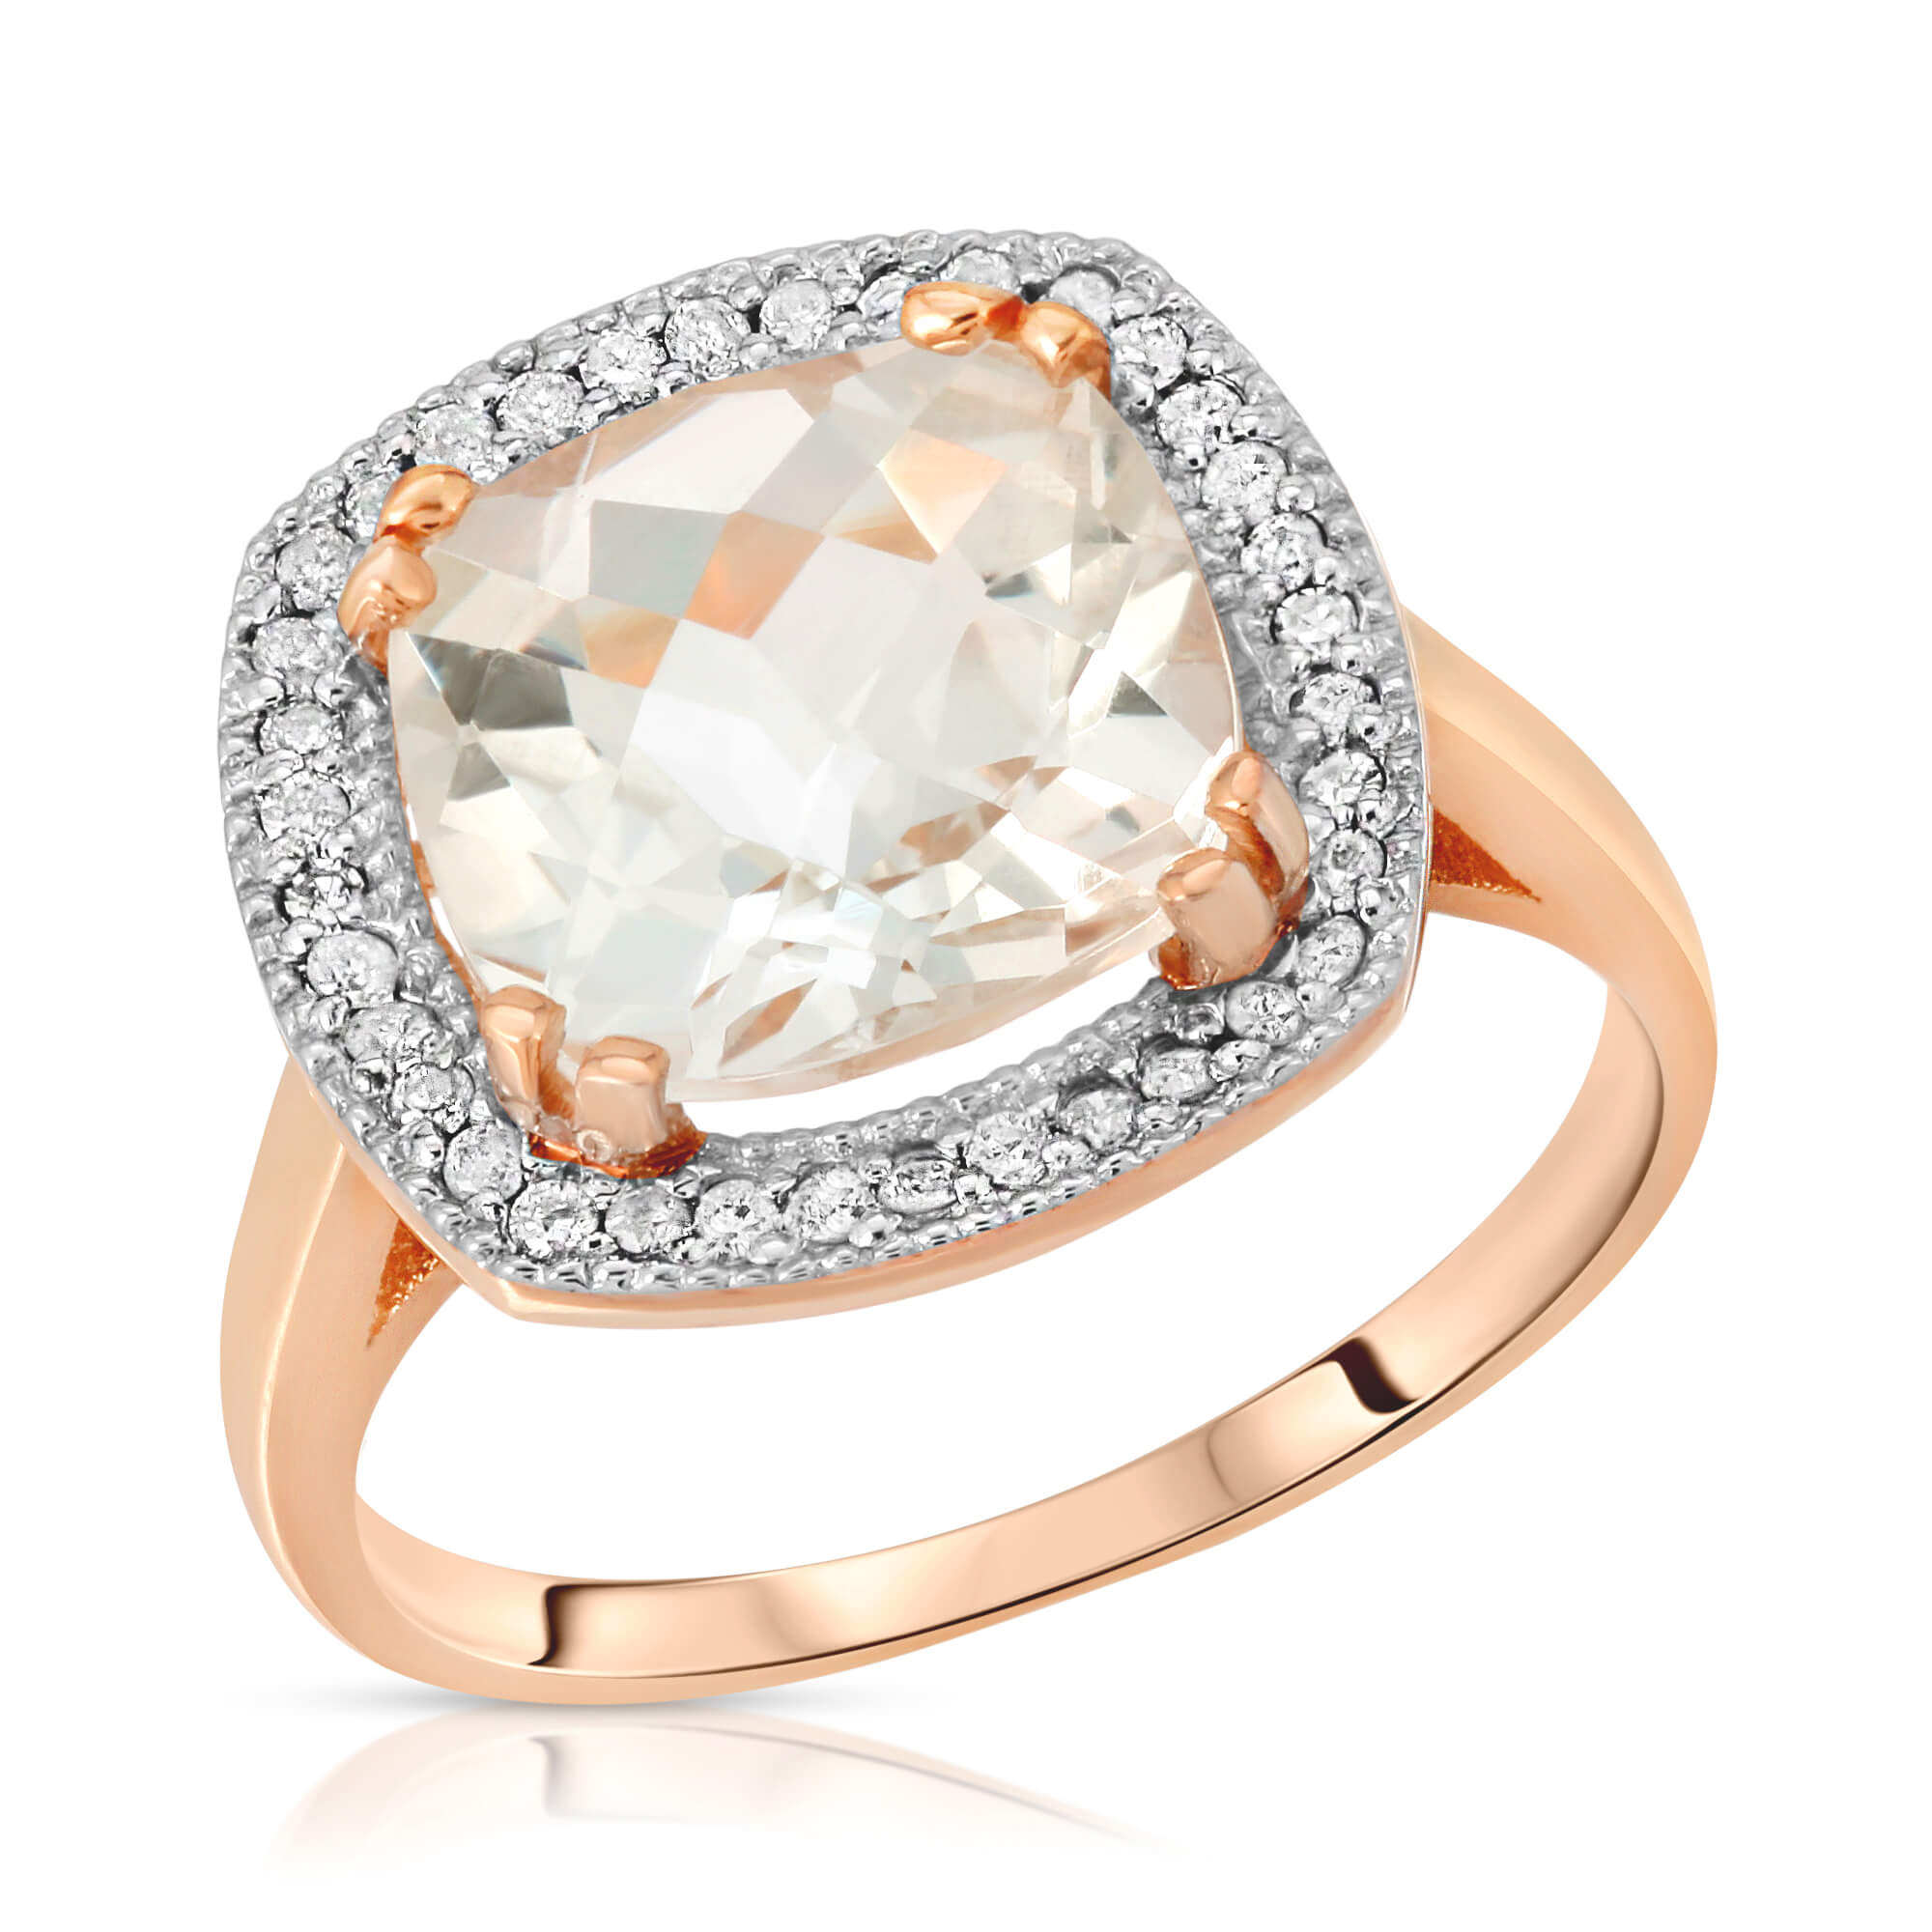 Cushion Cut White Topaz Ring 5.2 ctw in 9ct Rose Gold